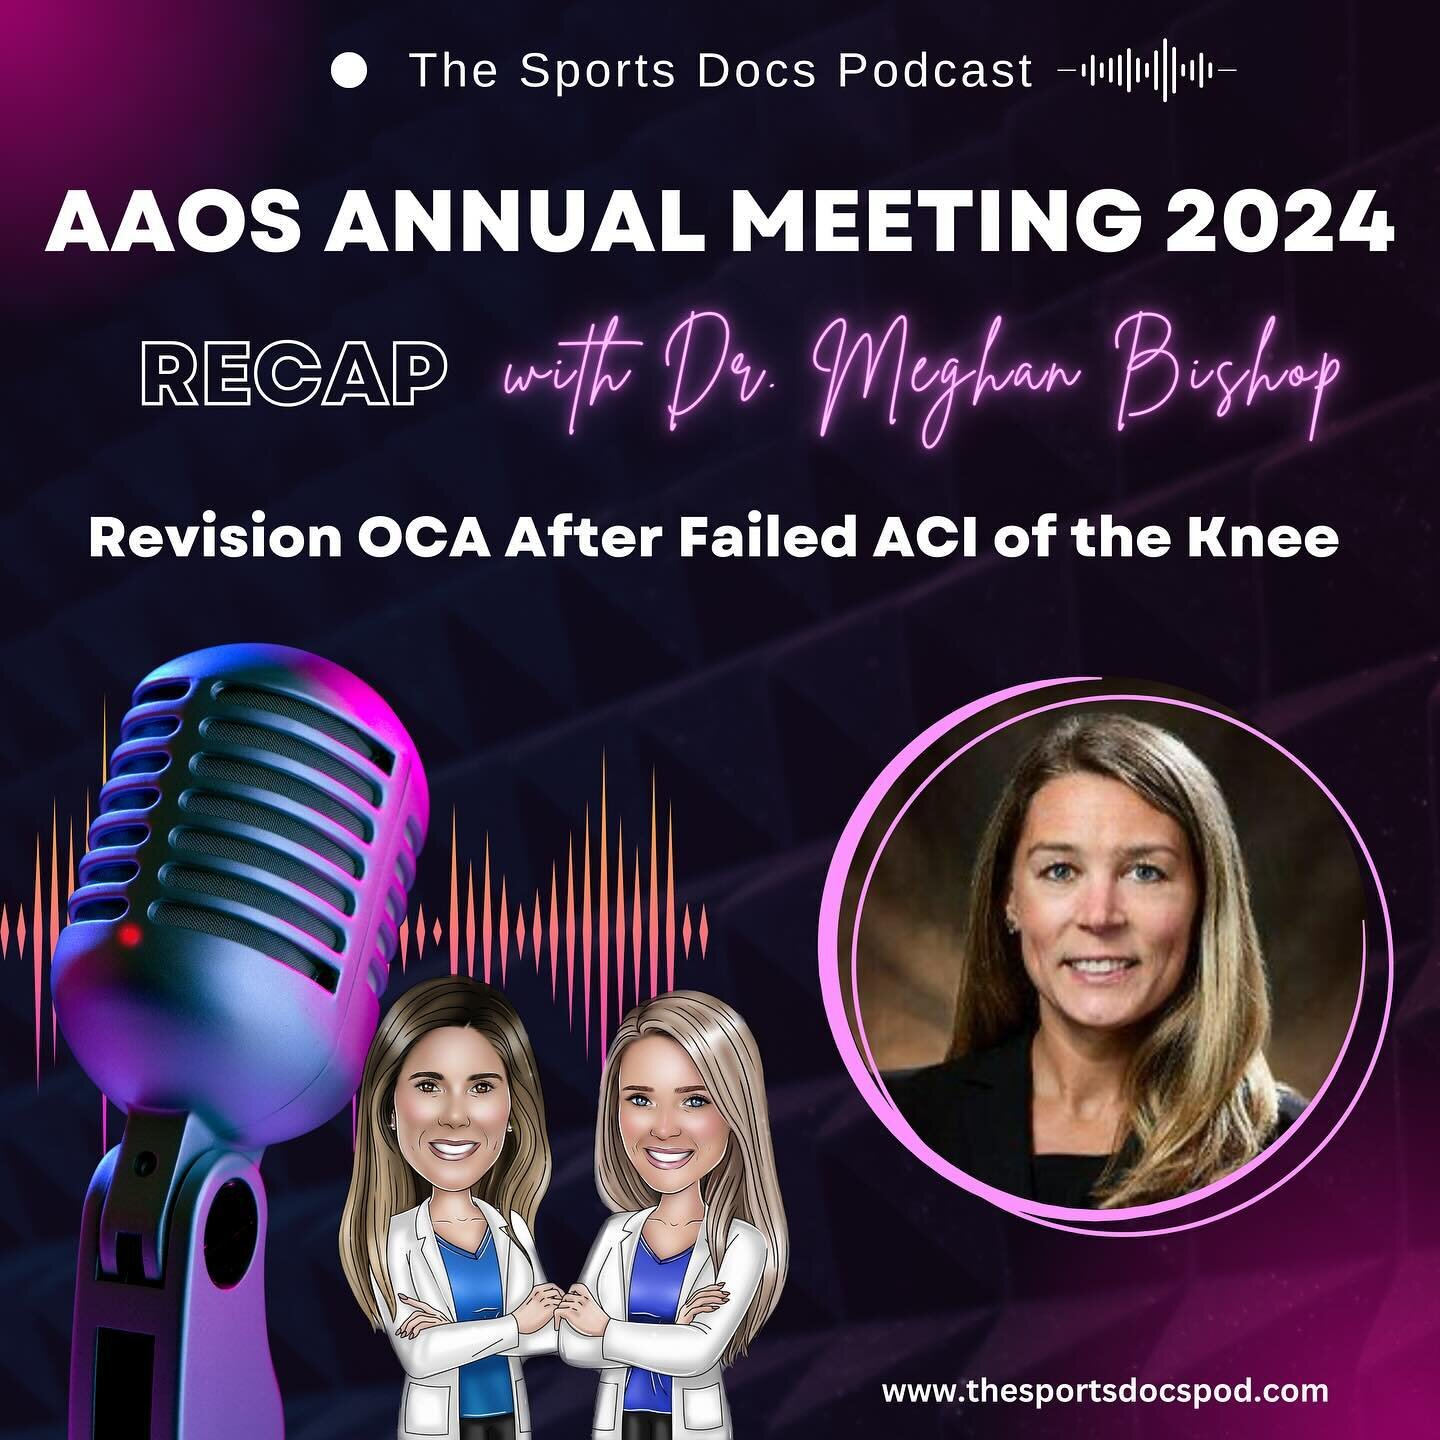 ✨ NEW episode is LIVE! ✨

We&rsquo;re continuing with our special series of episodes to recap the newest research presented at the American Academy of Orthopaedic Surgeons Annual Meeting held last month in San Francisco.

Were joined again by Dr. Meg